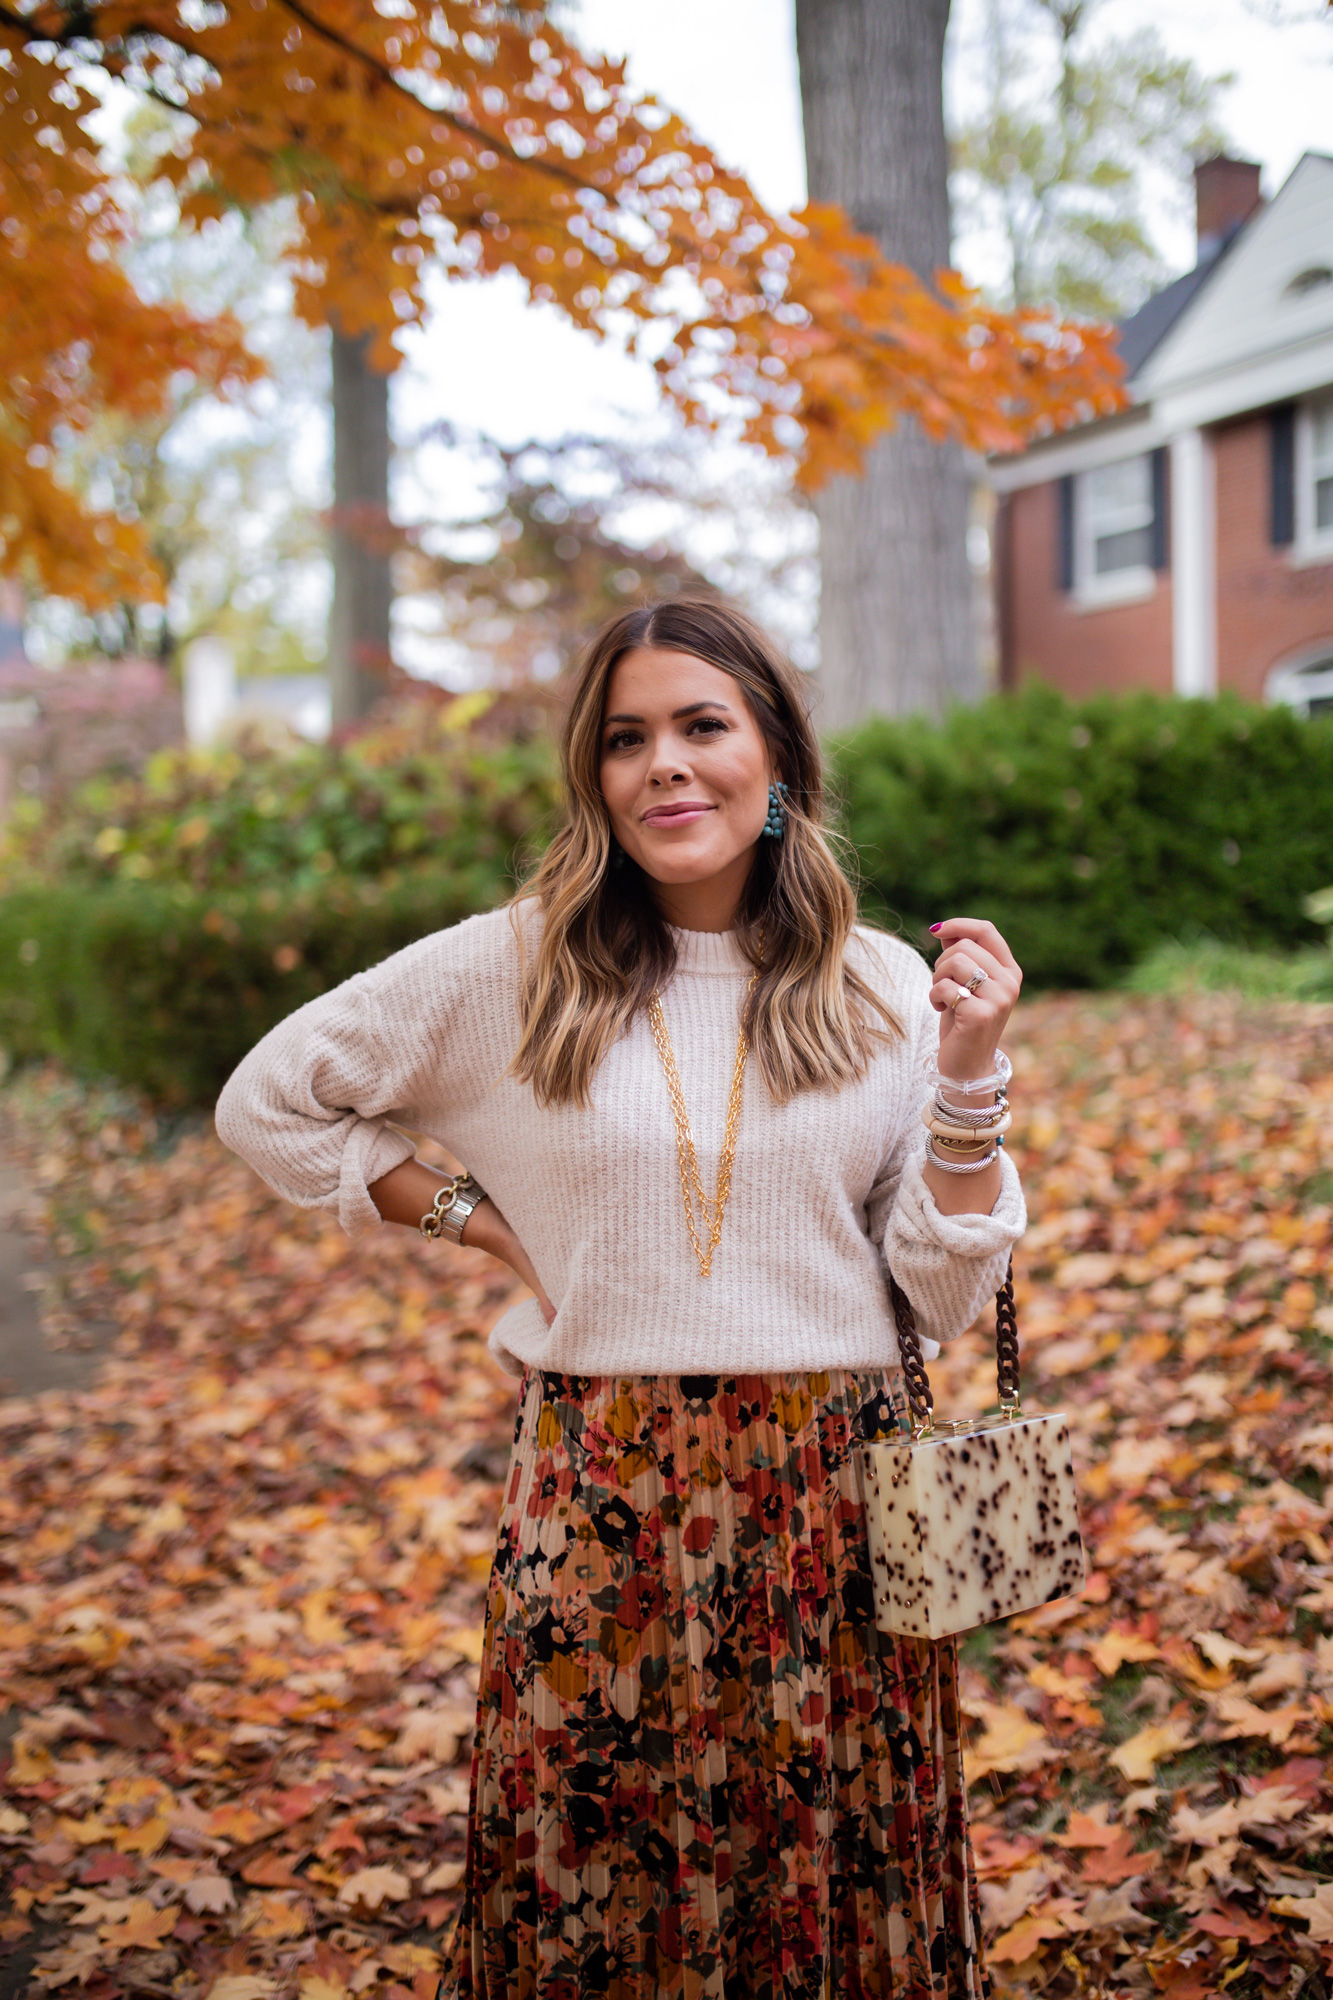 23 Cute Fall Outfits with Skirt to Inspire Your Fall Look